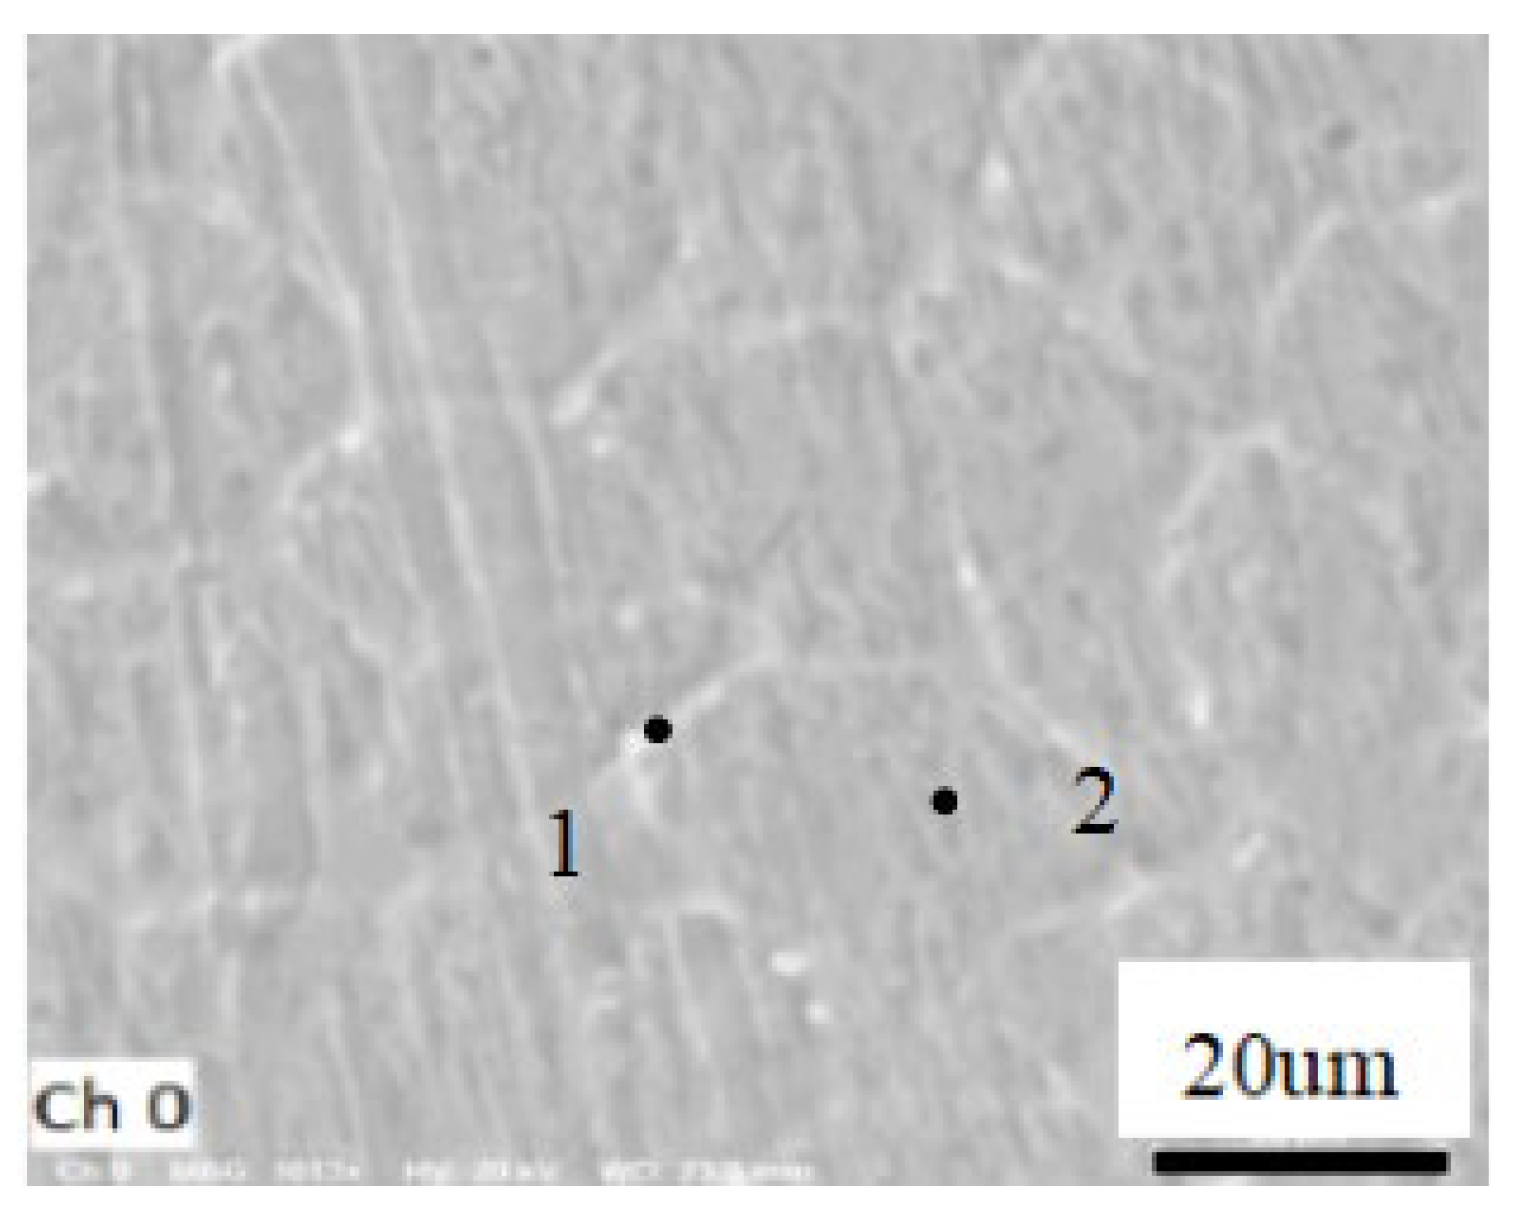 Study of the microstructure and mechanical properties of white